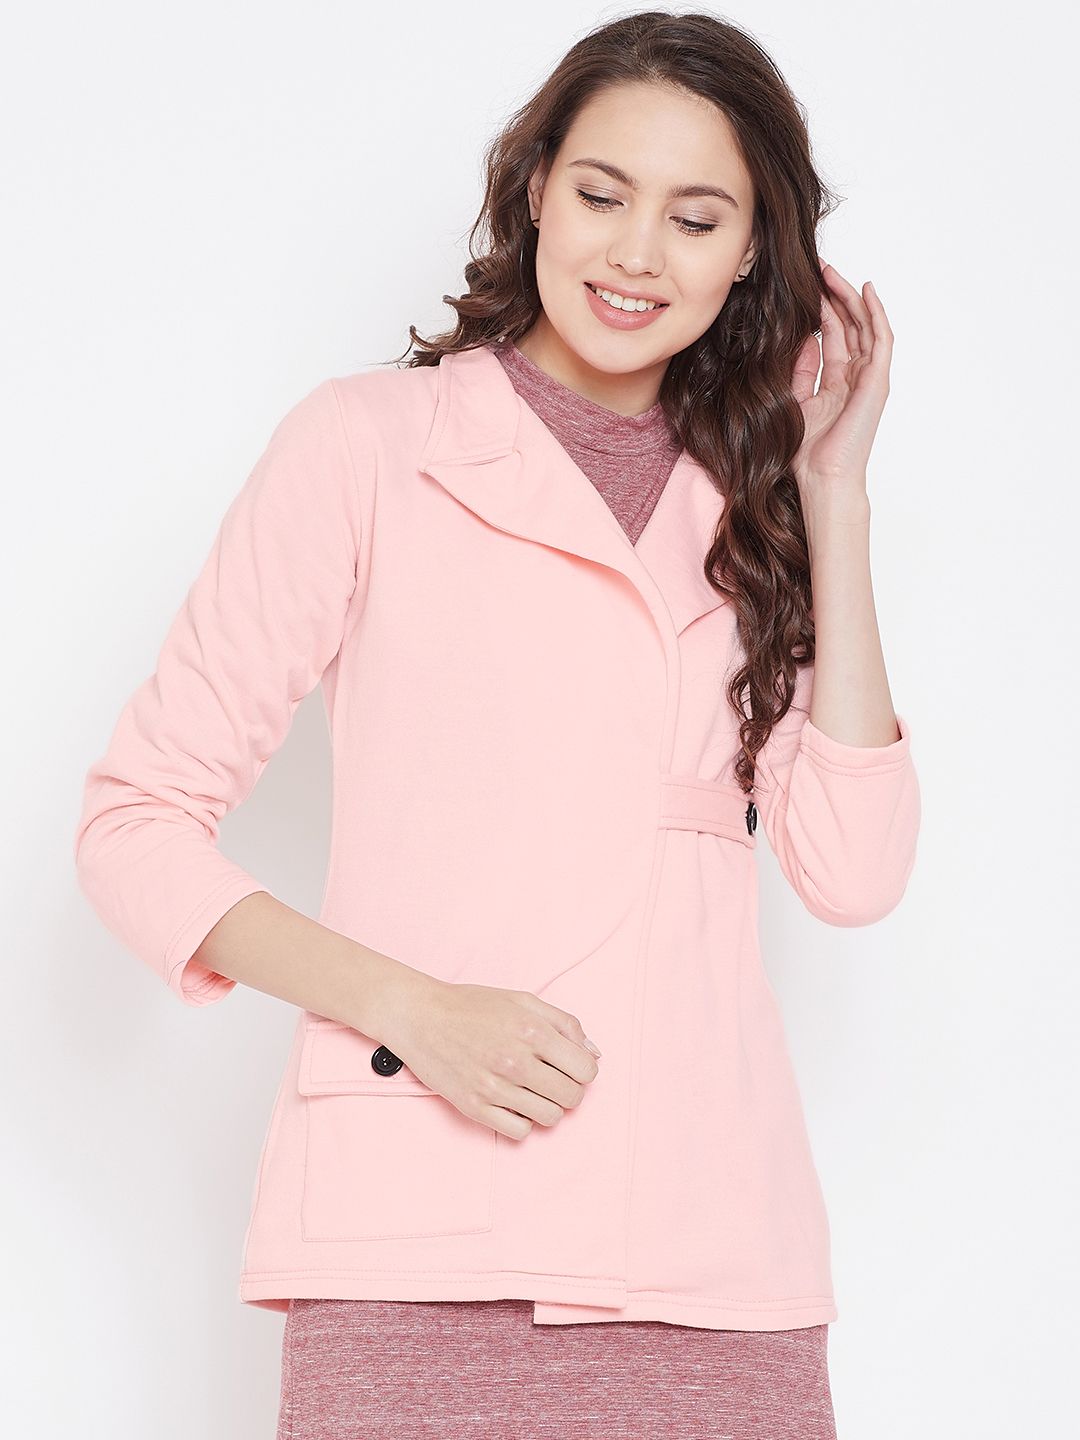 Belle Fille Women Pink Solid Wrap Jacket Price in India